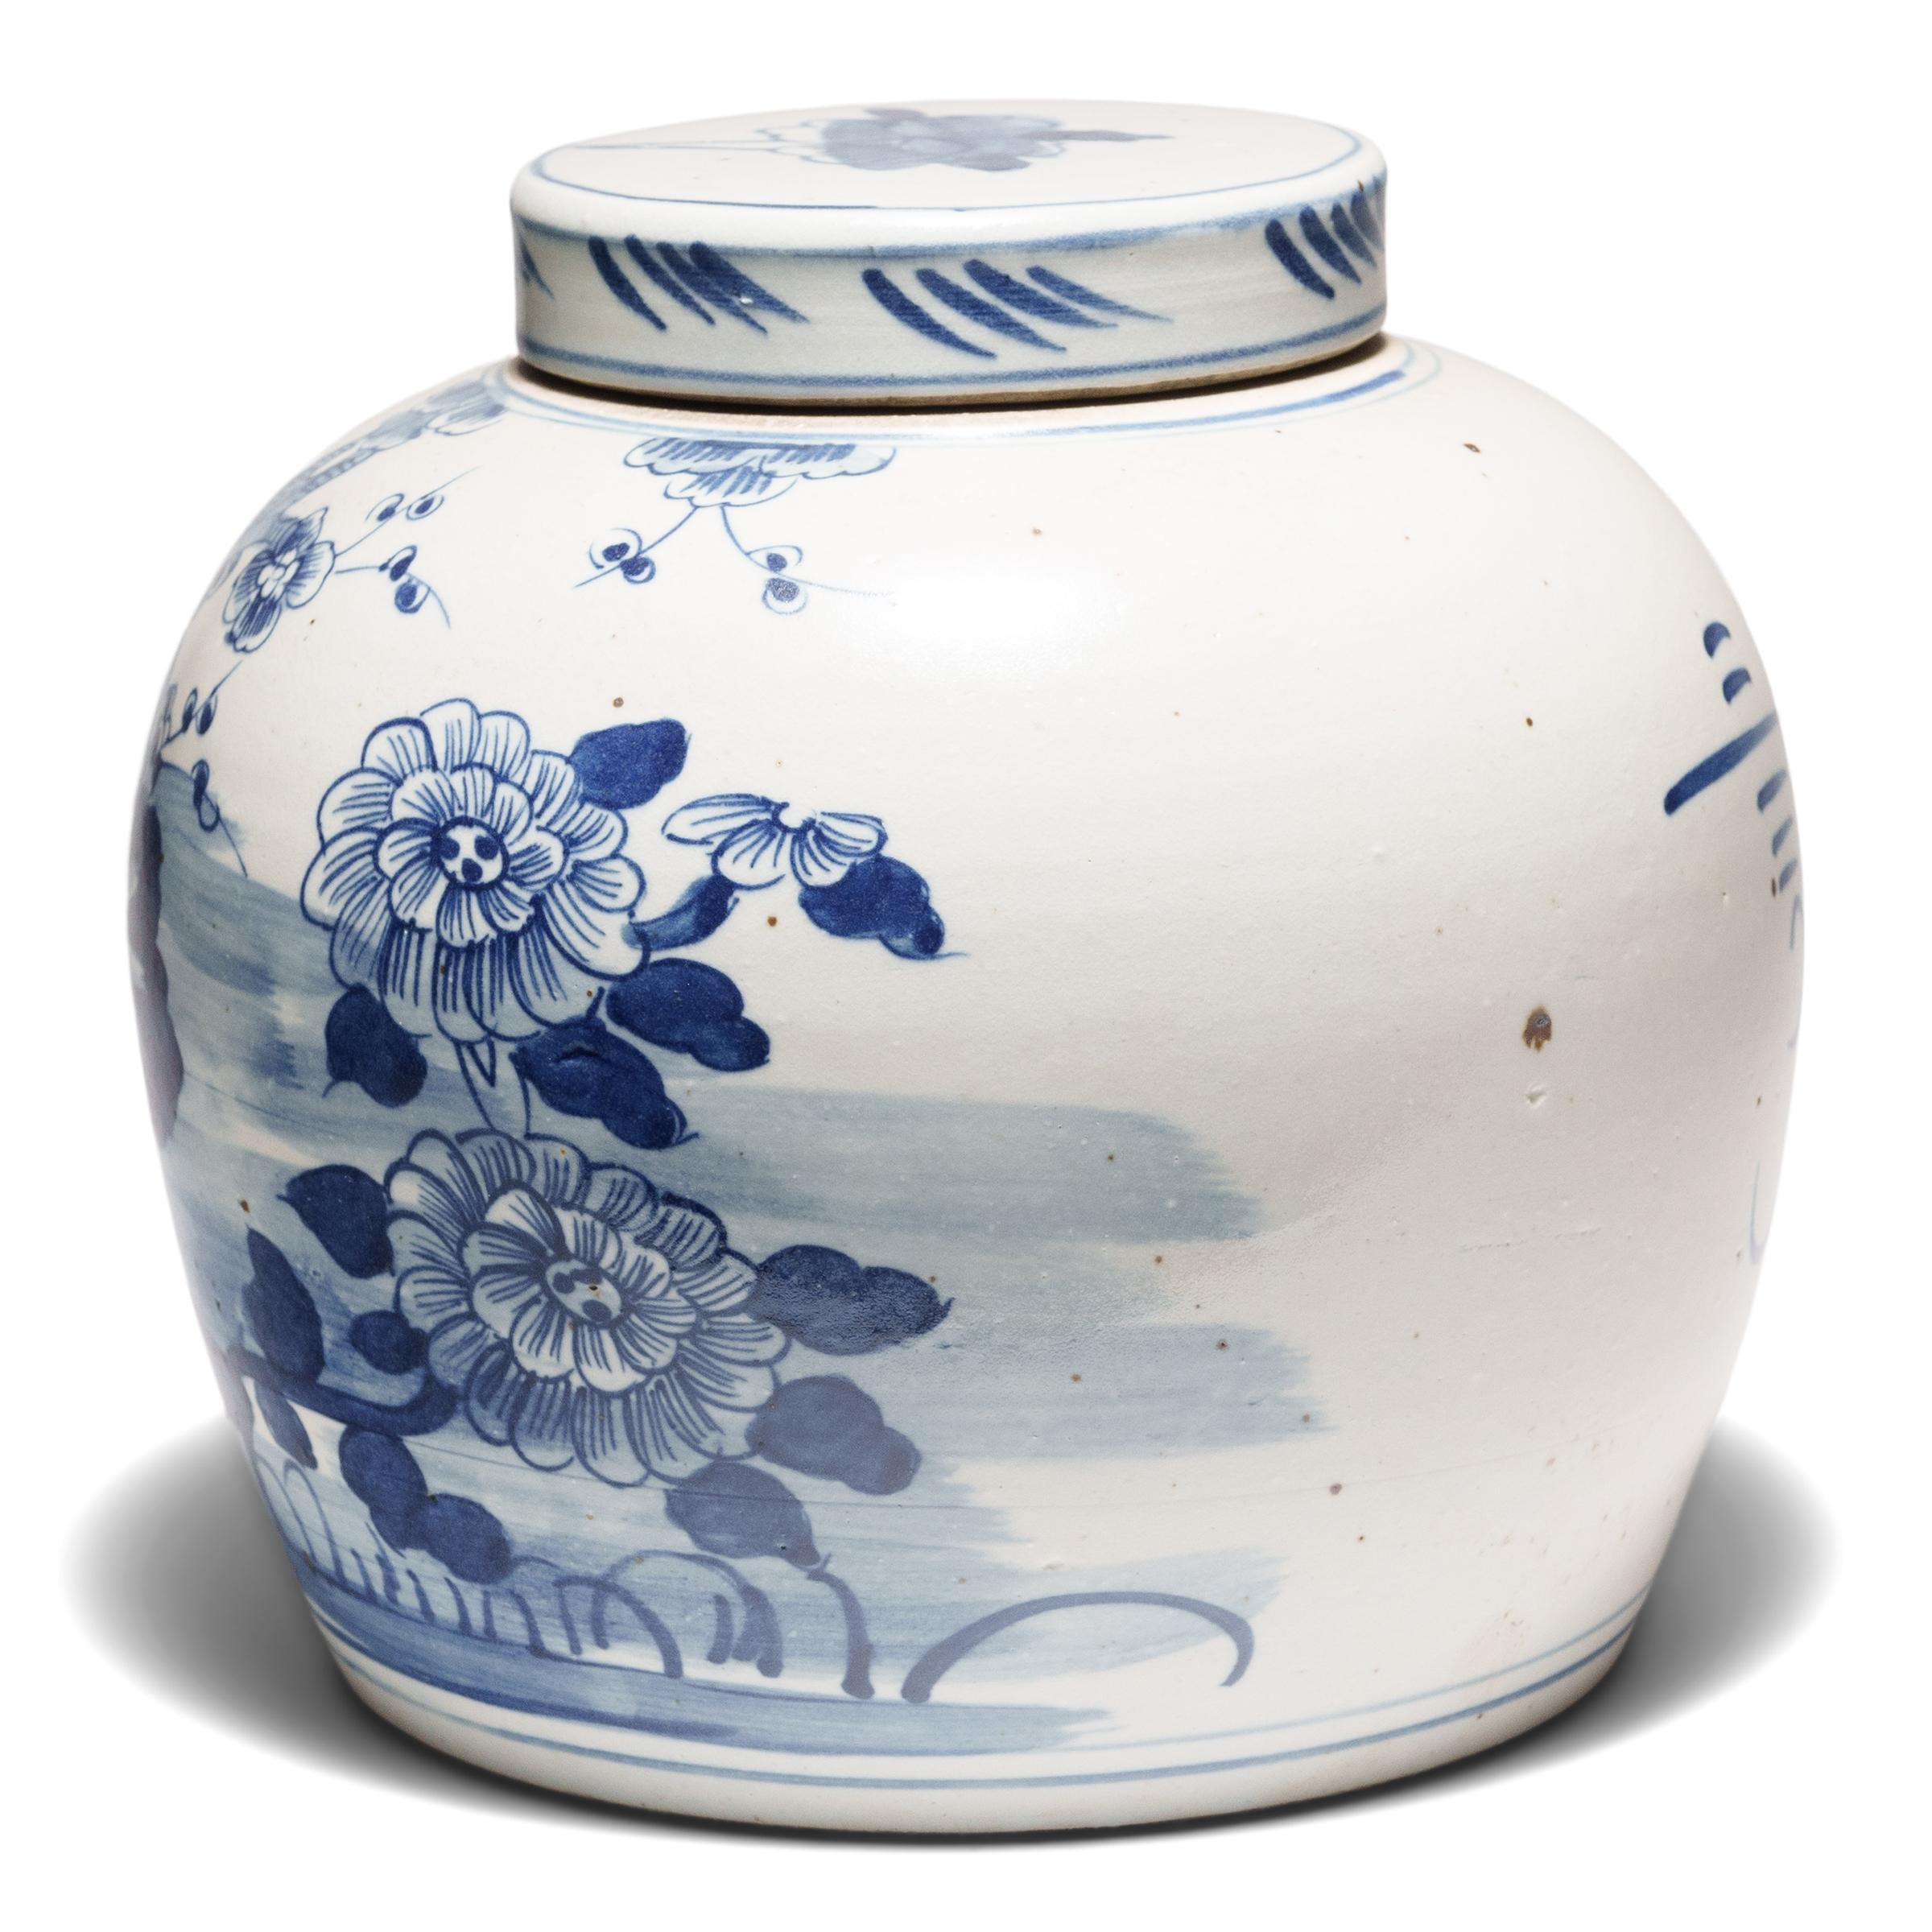 Loosely brushed with cobalt blue pigments, this round, blue-and-white storage jar is underglazed with lush garden scenery featuring the flowering plants of the four seasons. Tree peonies for spring adorn the left side, while round chrysanthemum